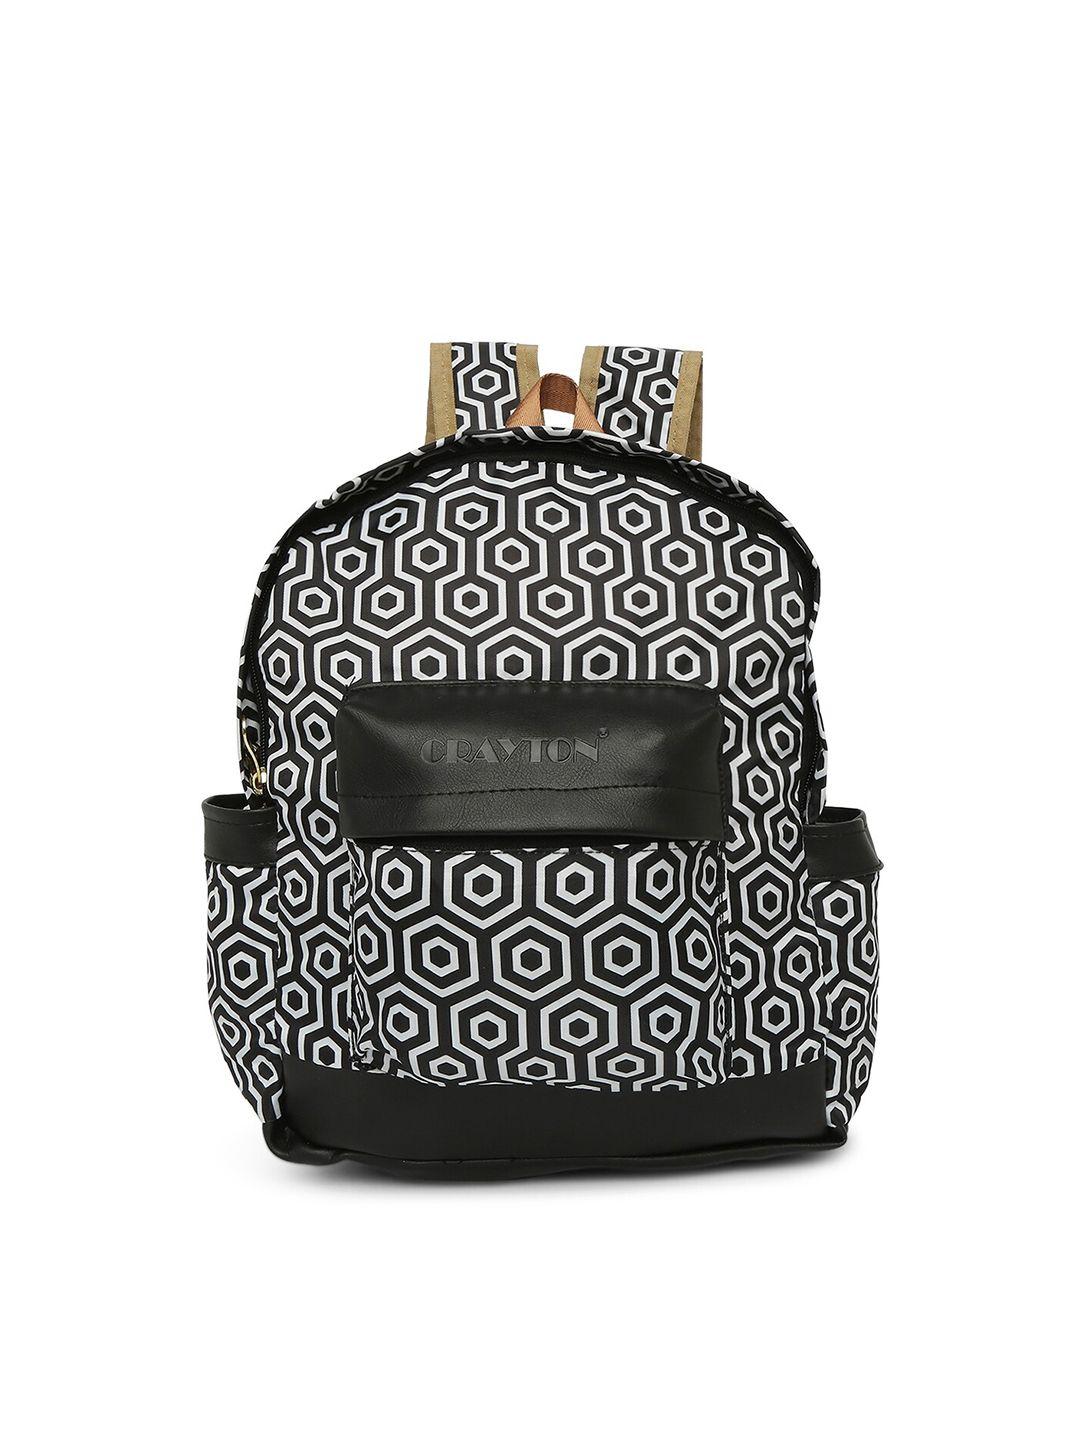 crayton women printed 14 inch laptop backpack with compression straps